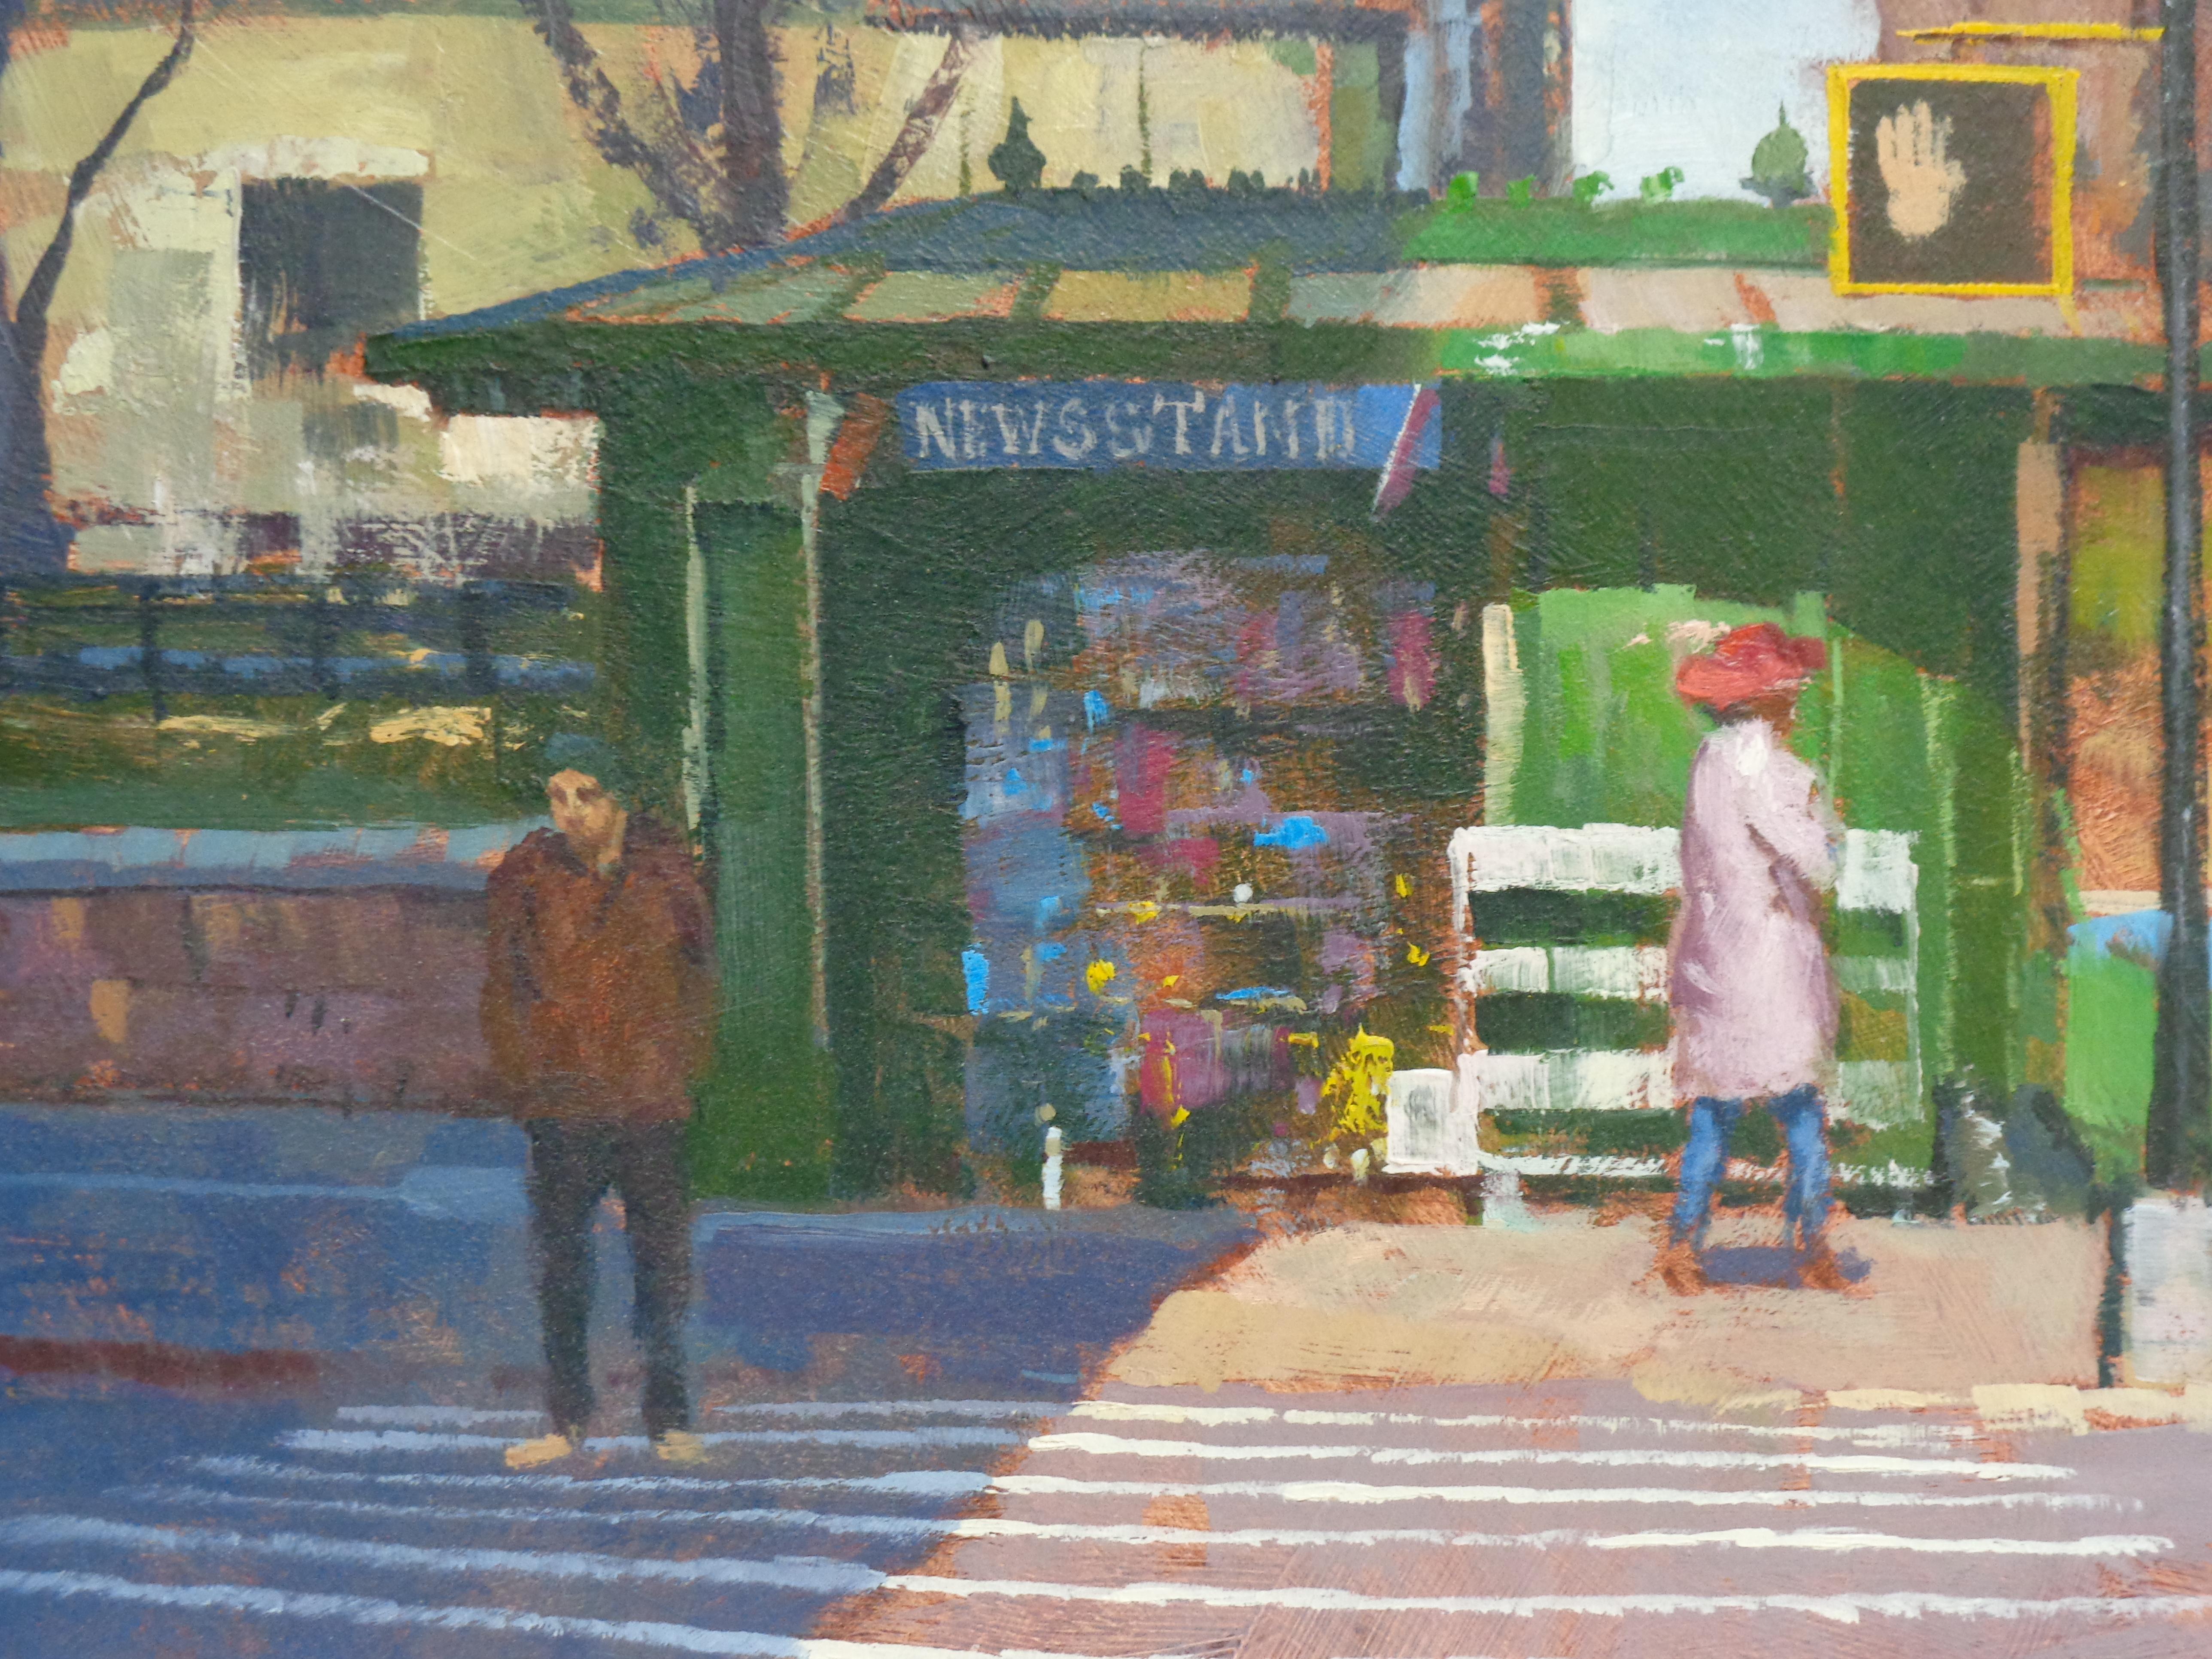  A beautiful painting of NYC by contemporary artist Paul Bachem
oil on canvas on panel
11 x 14


BIOGRAPHY
Paul Bachem studied with Harold R. Stevenson and Alma Gallanos Stevenson and enjoyed a 30 year illustration career. He worked for clients in